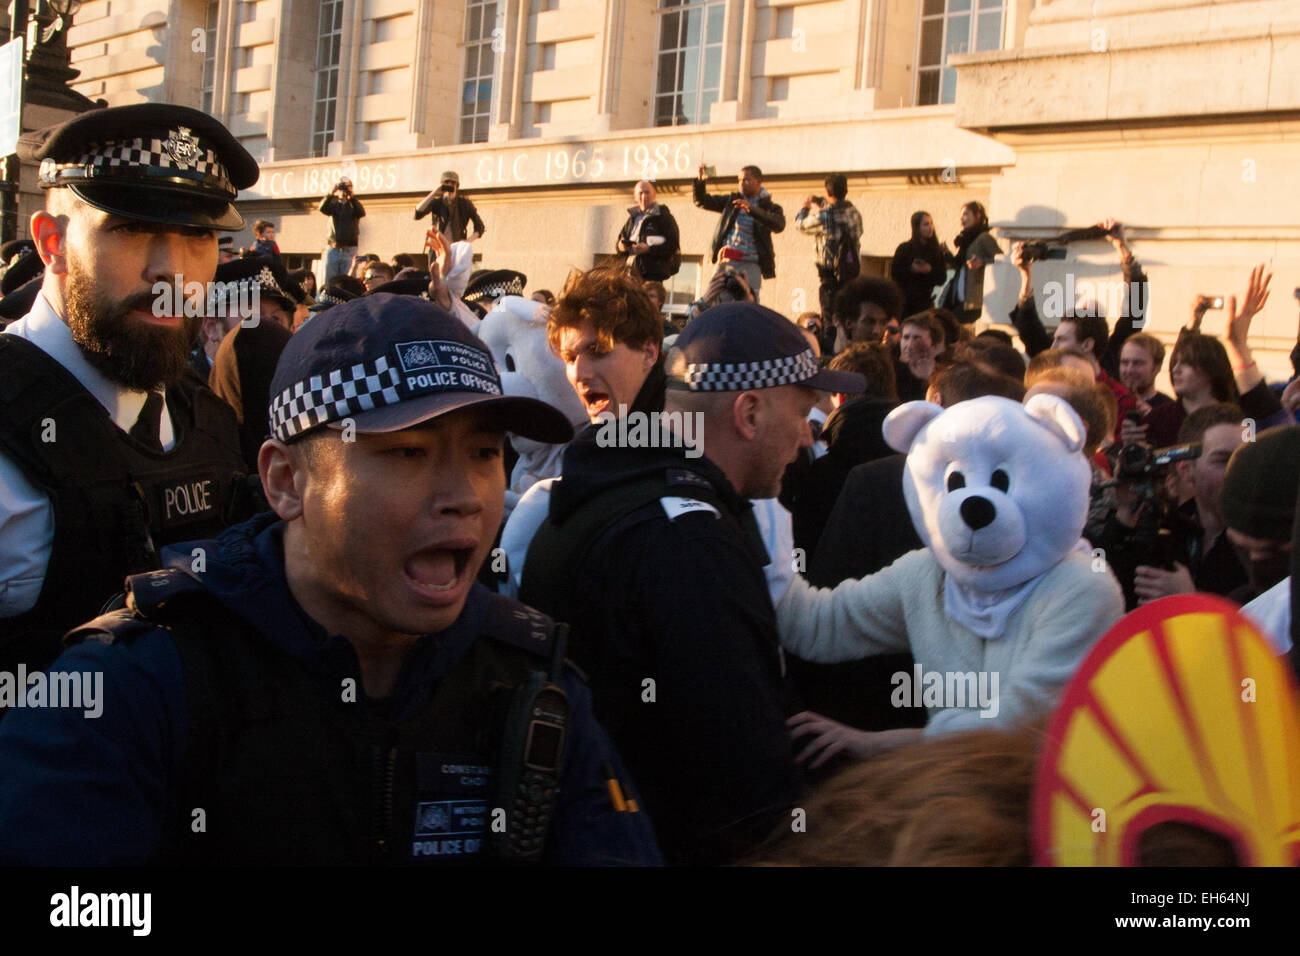 London, UK. 7th March, 2015. Following the Climate march through London, masked anarchists and environmental activists clash with police following a breakaway protest at Shell House. PICTURED: A man dressed in a polar bear suitlooks on as a TSG officer shouts at activists blocking the path of a police van containing a colleague of the protesters arrested earlier. Credit:  Paul Davey/Alamy Live News Stock Photo